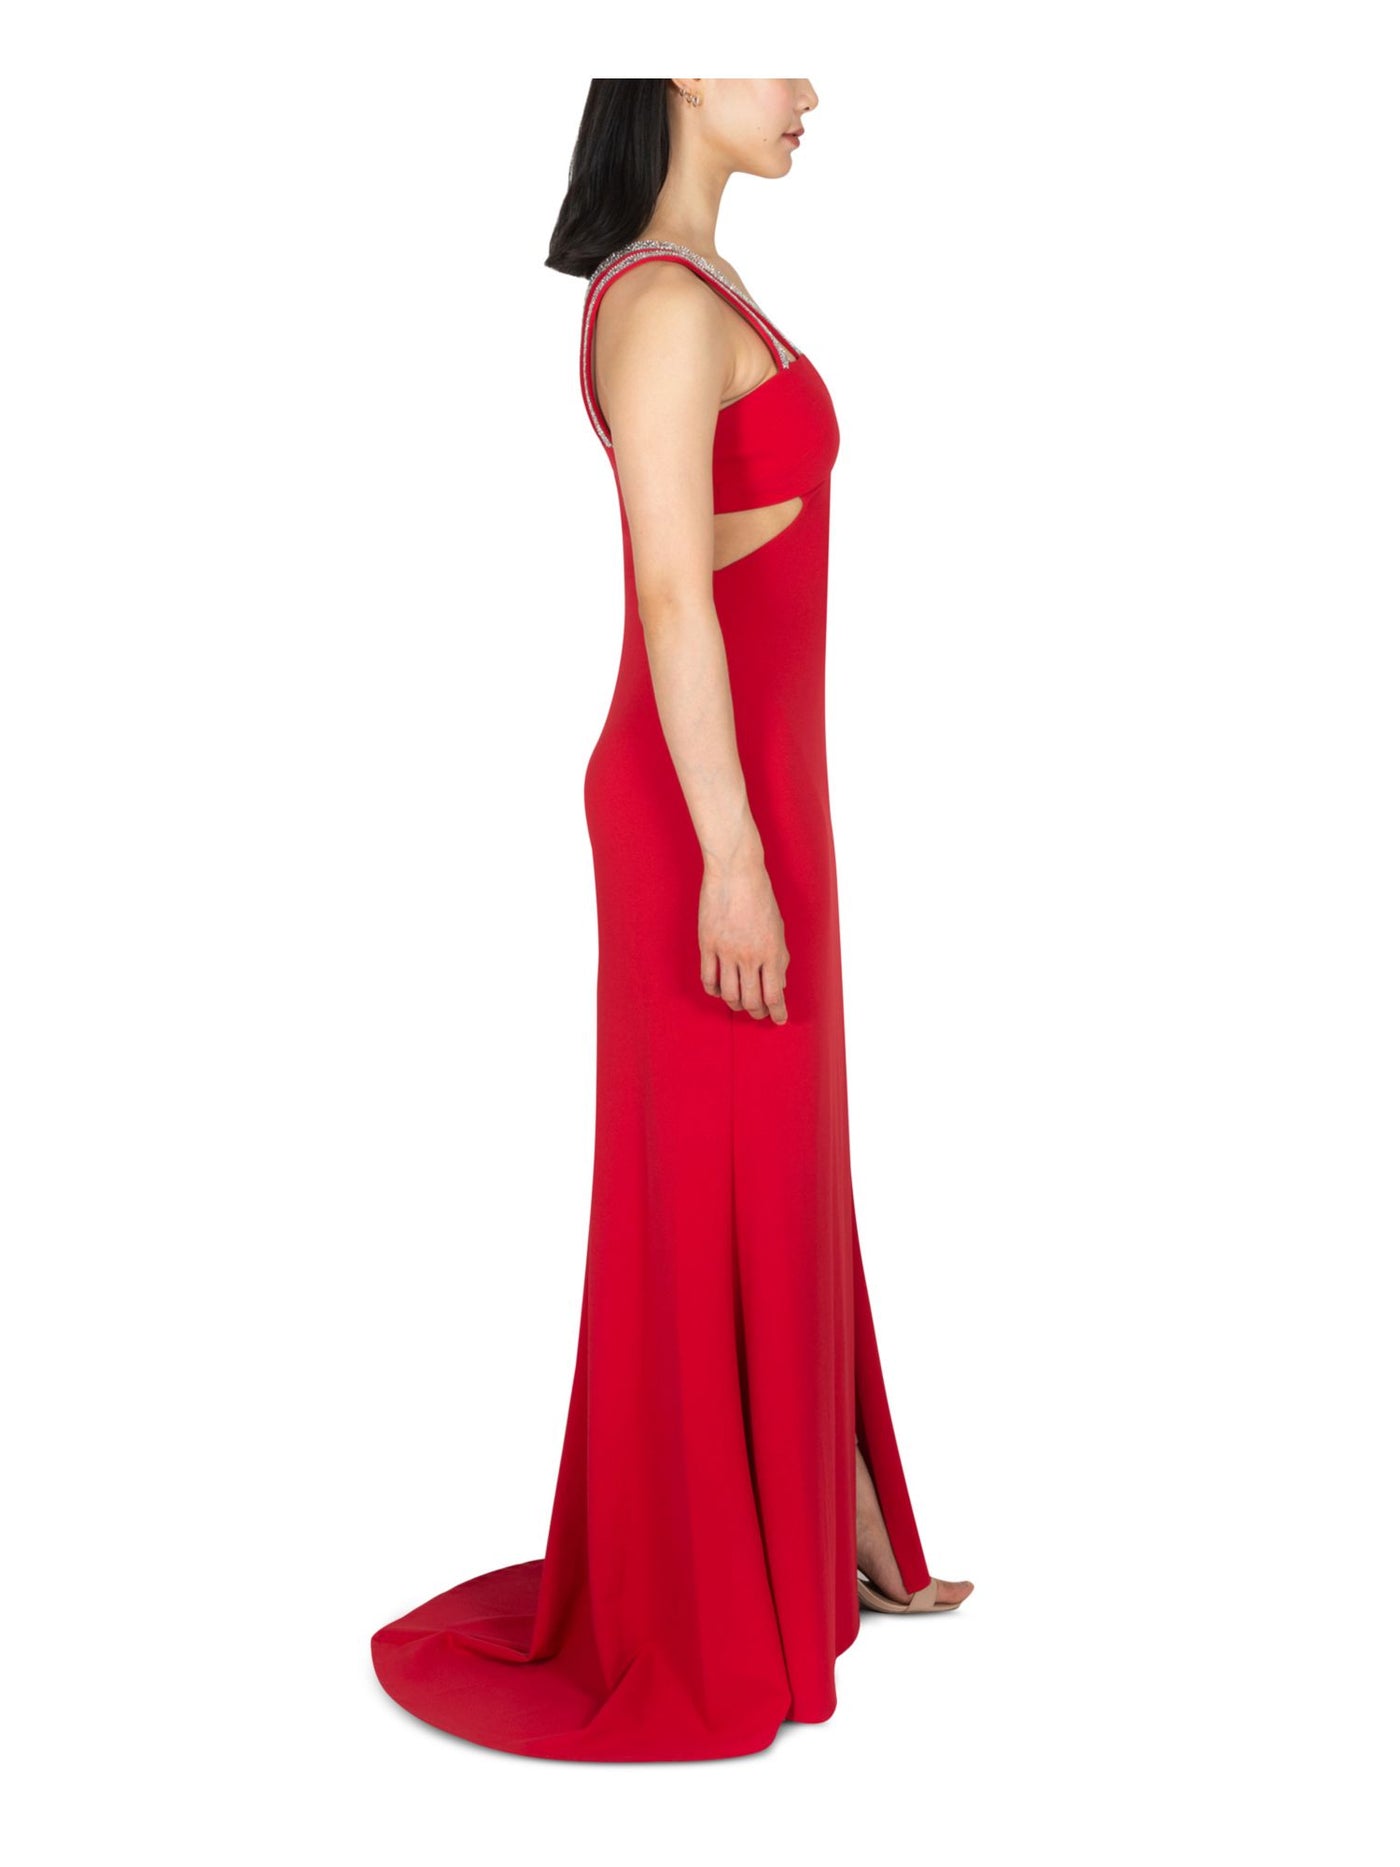 DEAR MOON Womens Red Stretch Zippered Slitted Embellished Double Straps Line V Neck Full-Length Prom Gown Dress 7